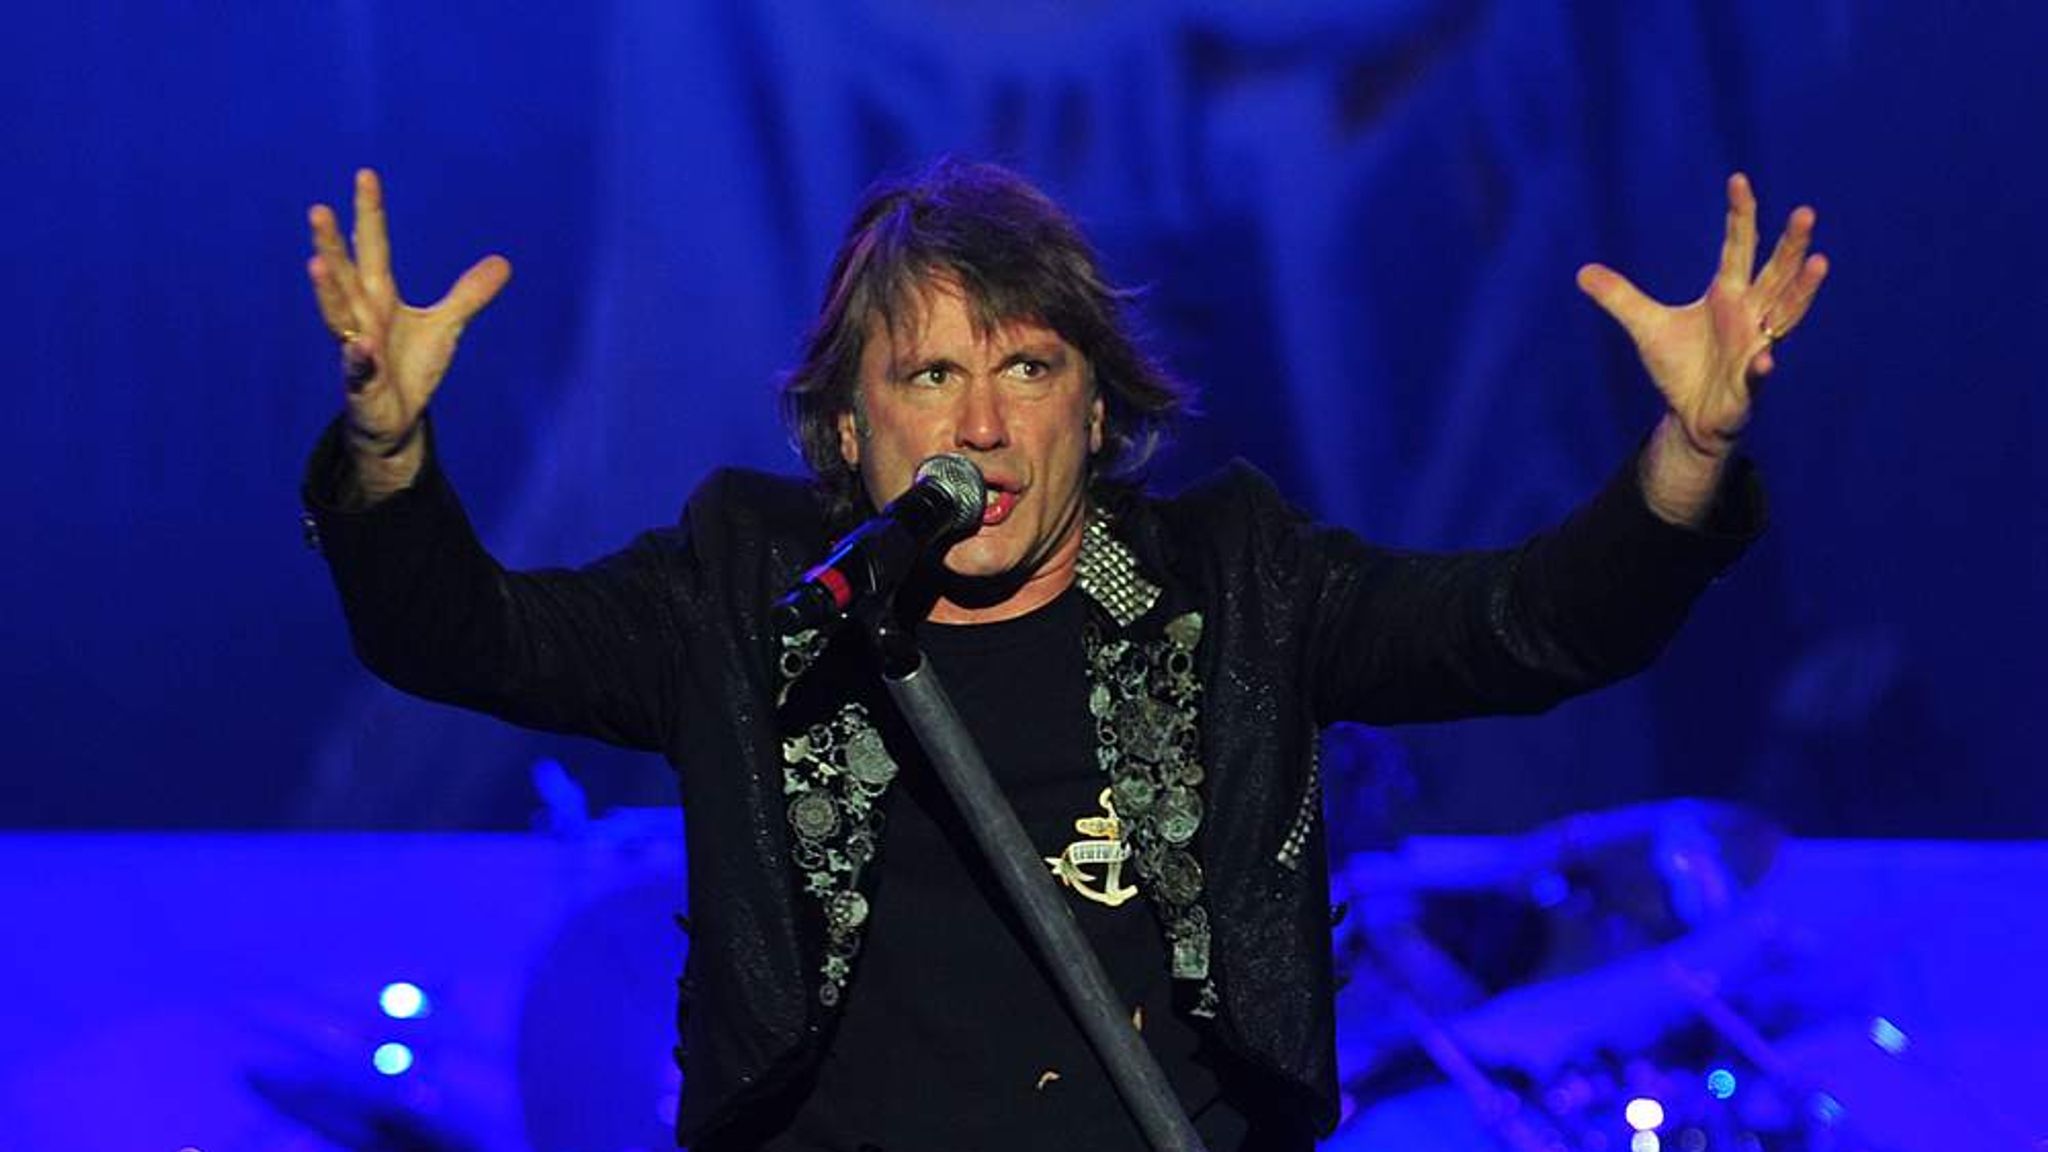 Iron Maiden will live on beyond Bruce Dickinson says singer